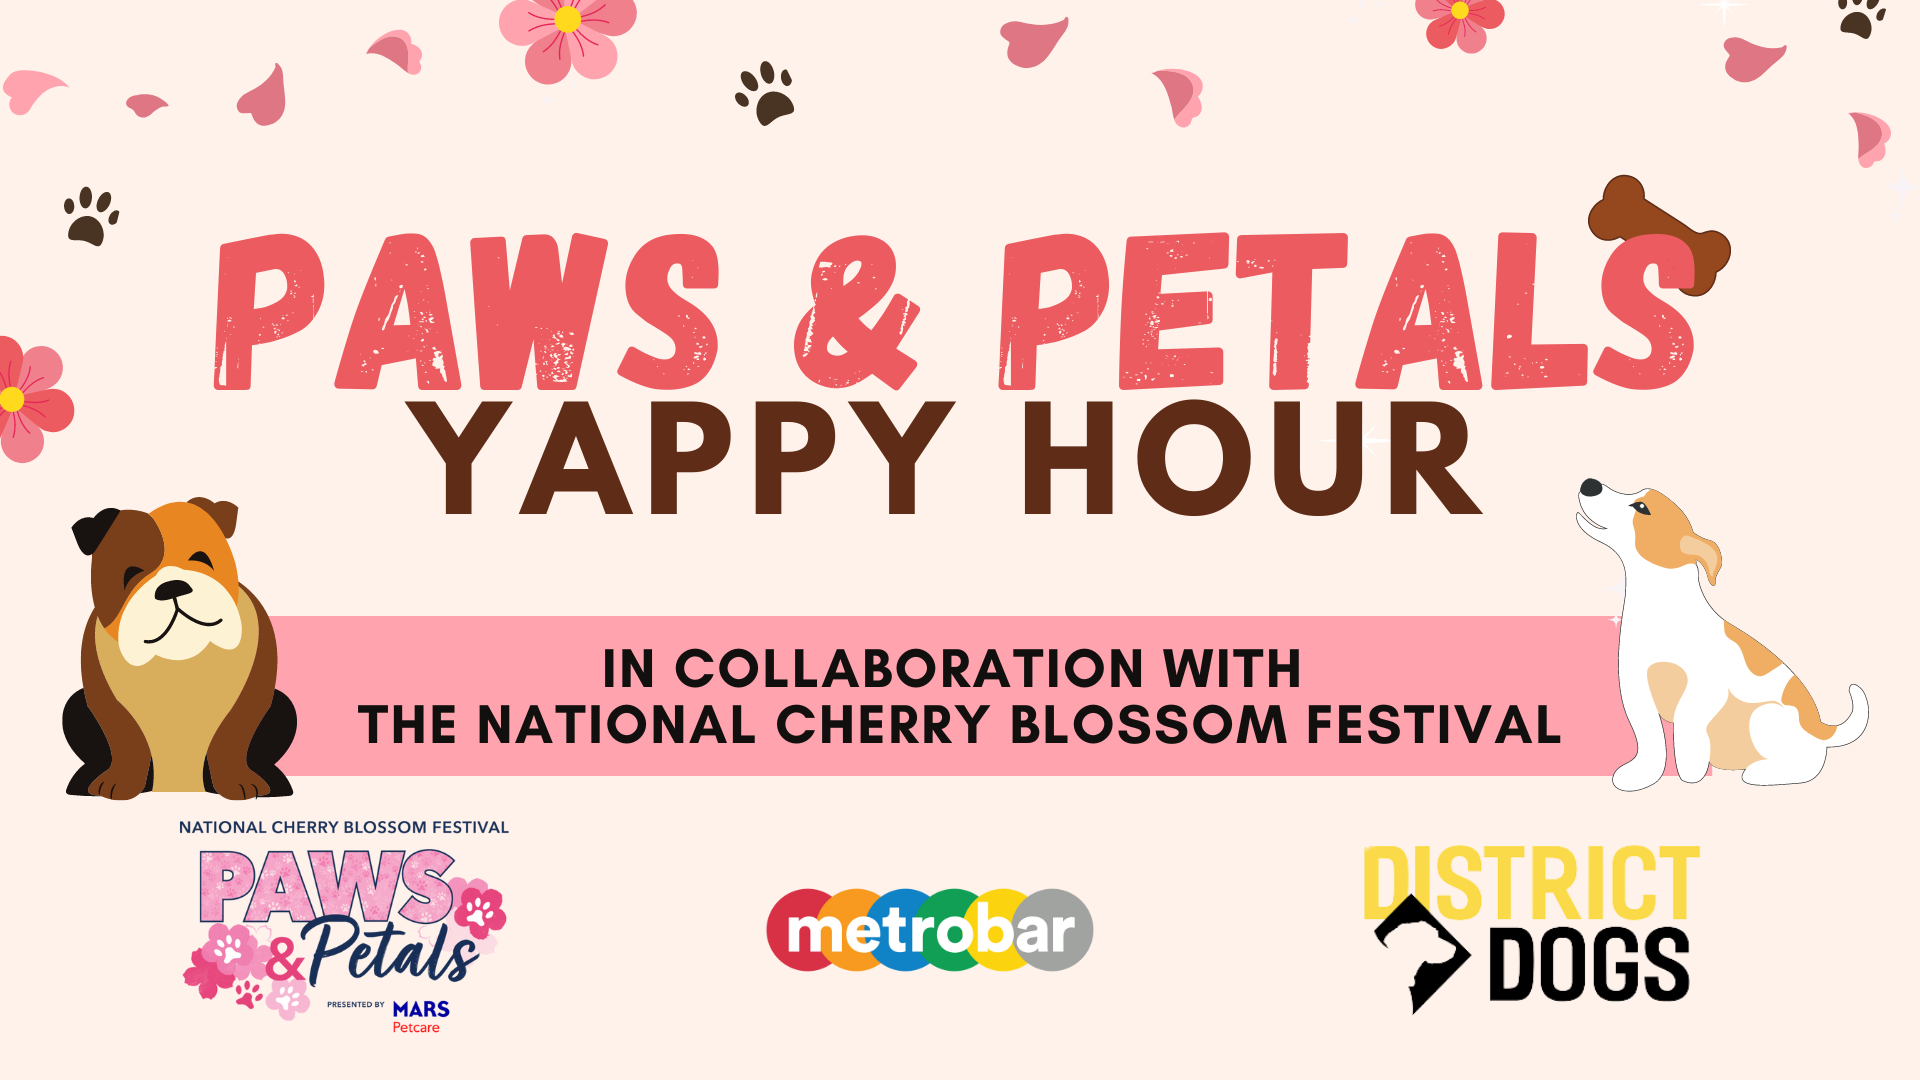 Paws & Petals Yappy Hour